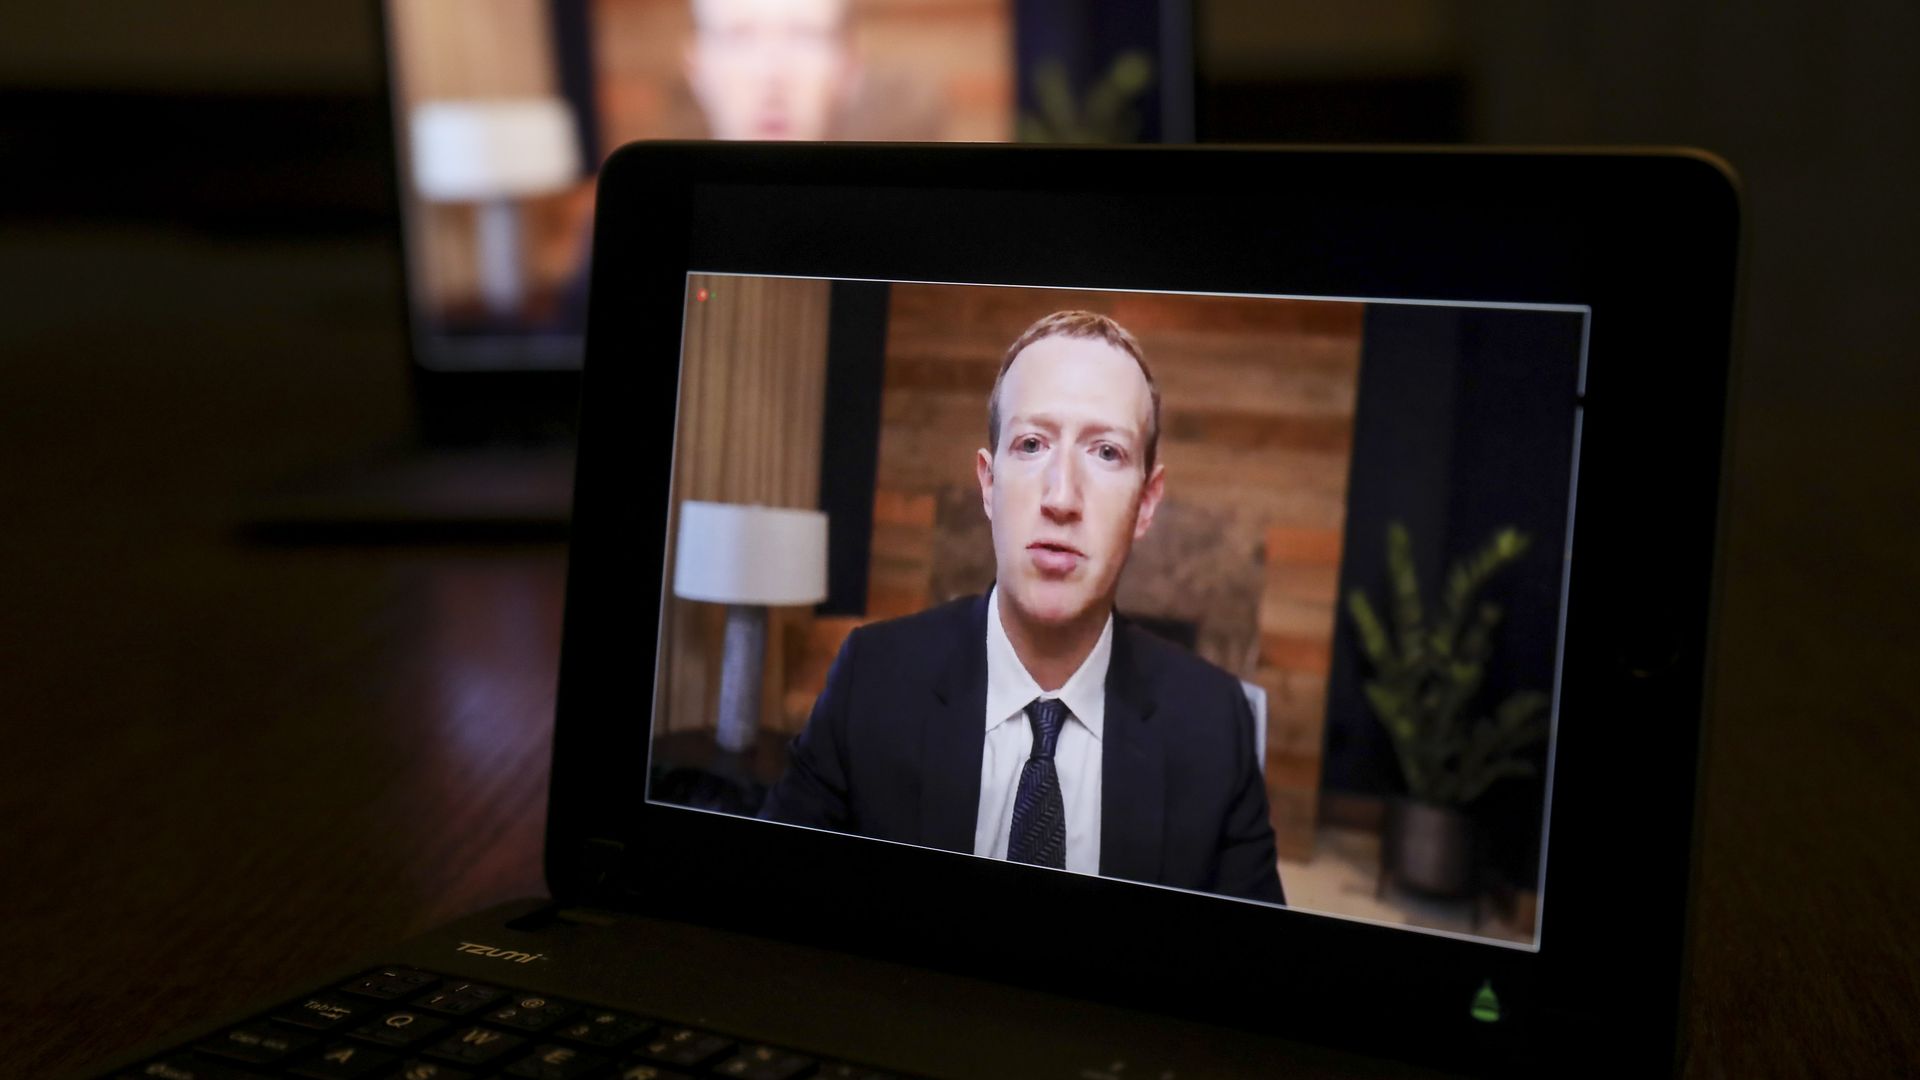 Mark Zuckerberg, Facebook CEO, speaks virtually at  a House hearing on a laptop computer in Tiskilwa, Illinois, U.S., on Thursday, March 25